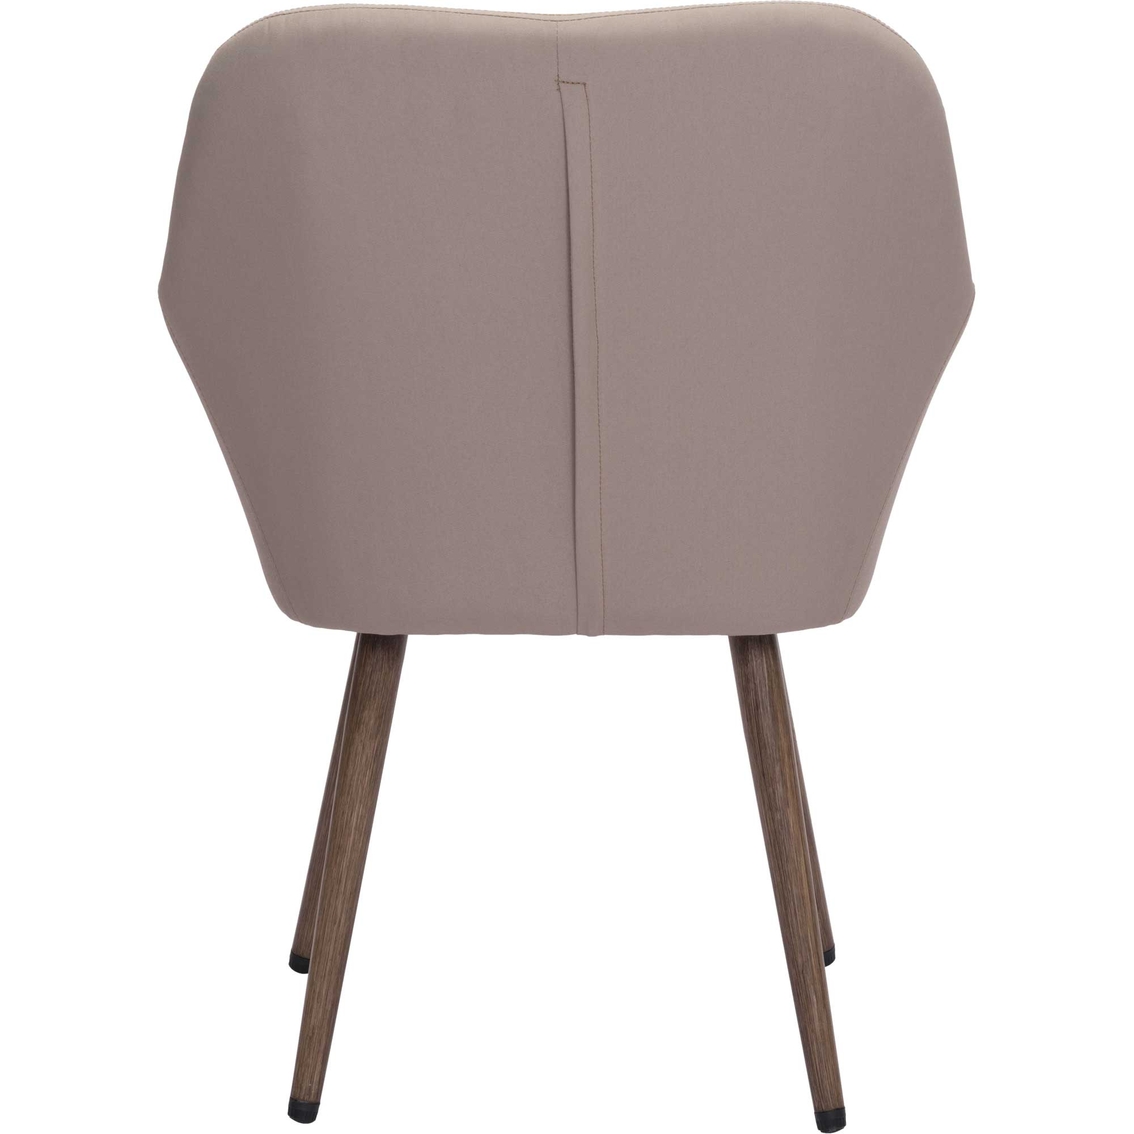 Zuo Modern Pismo Dining Chair - Image 4 of 7